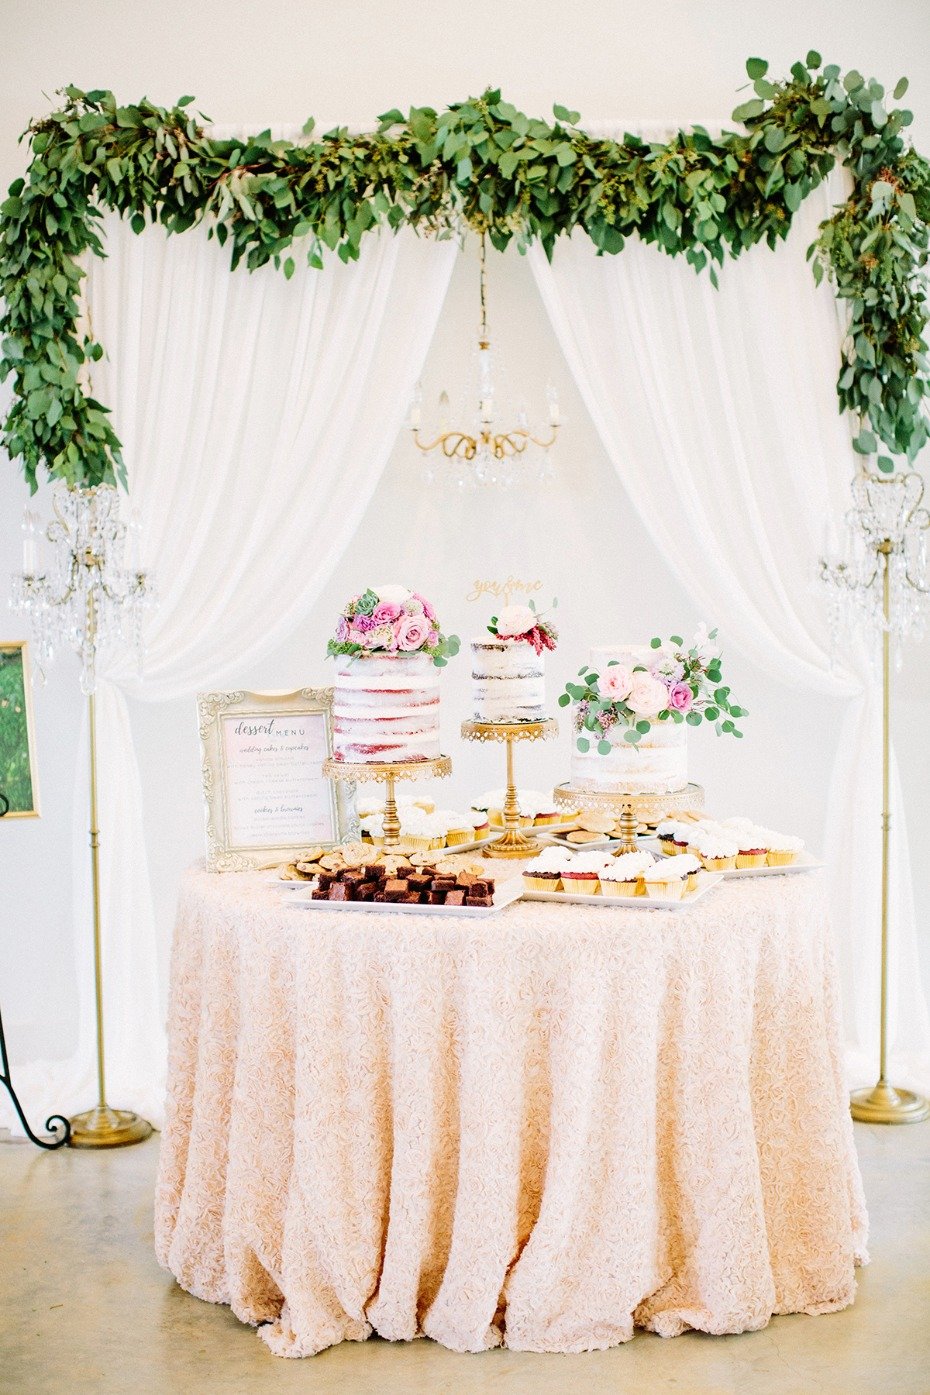 Sweetest cake table